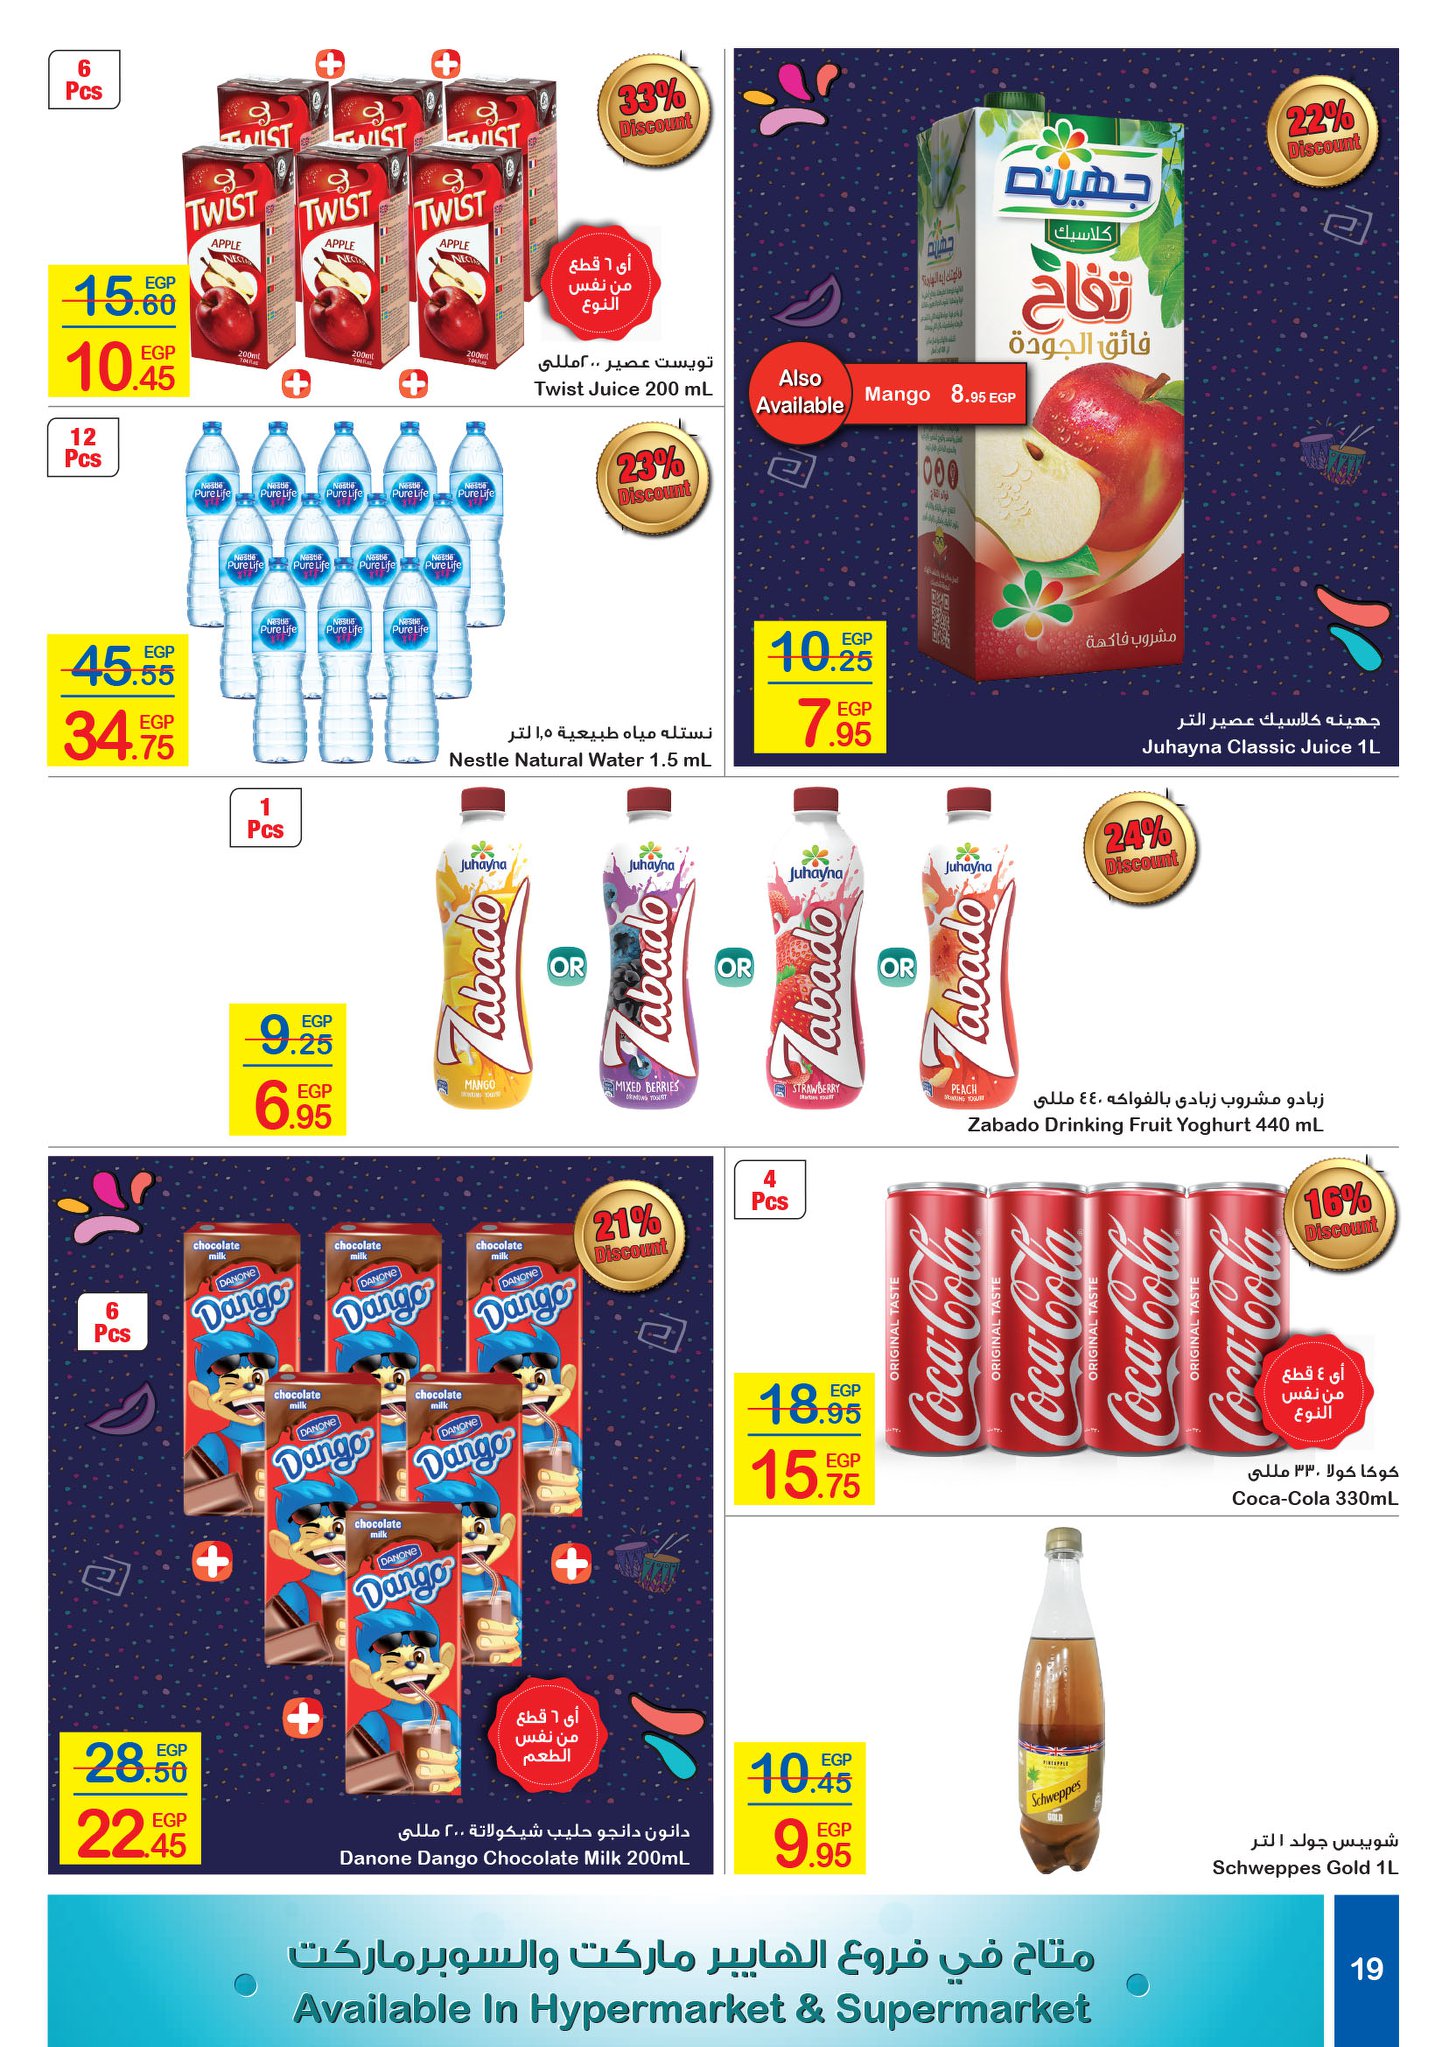 Carrefour Flyer from 16/7 till 27/7 | Carrefour Egypt 19